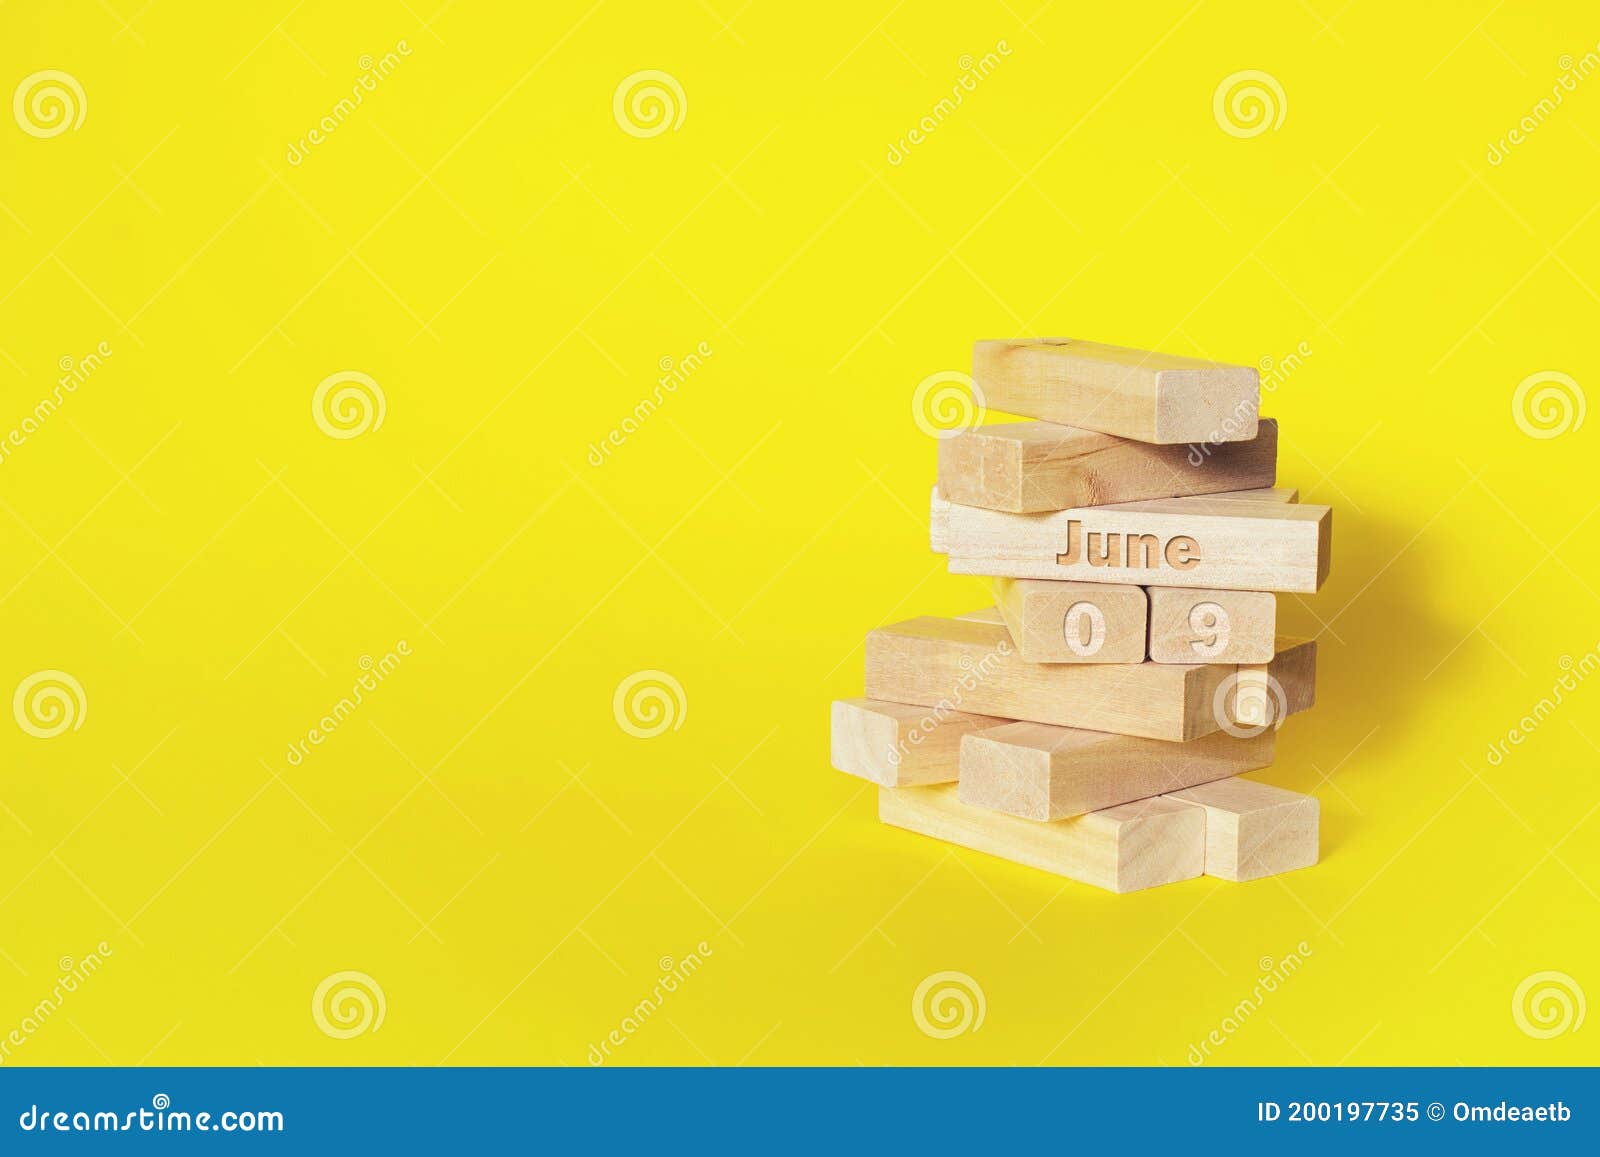 June 9th. Day 9 of Month, Calendar Date Stock Image Image of annual